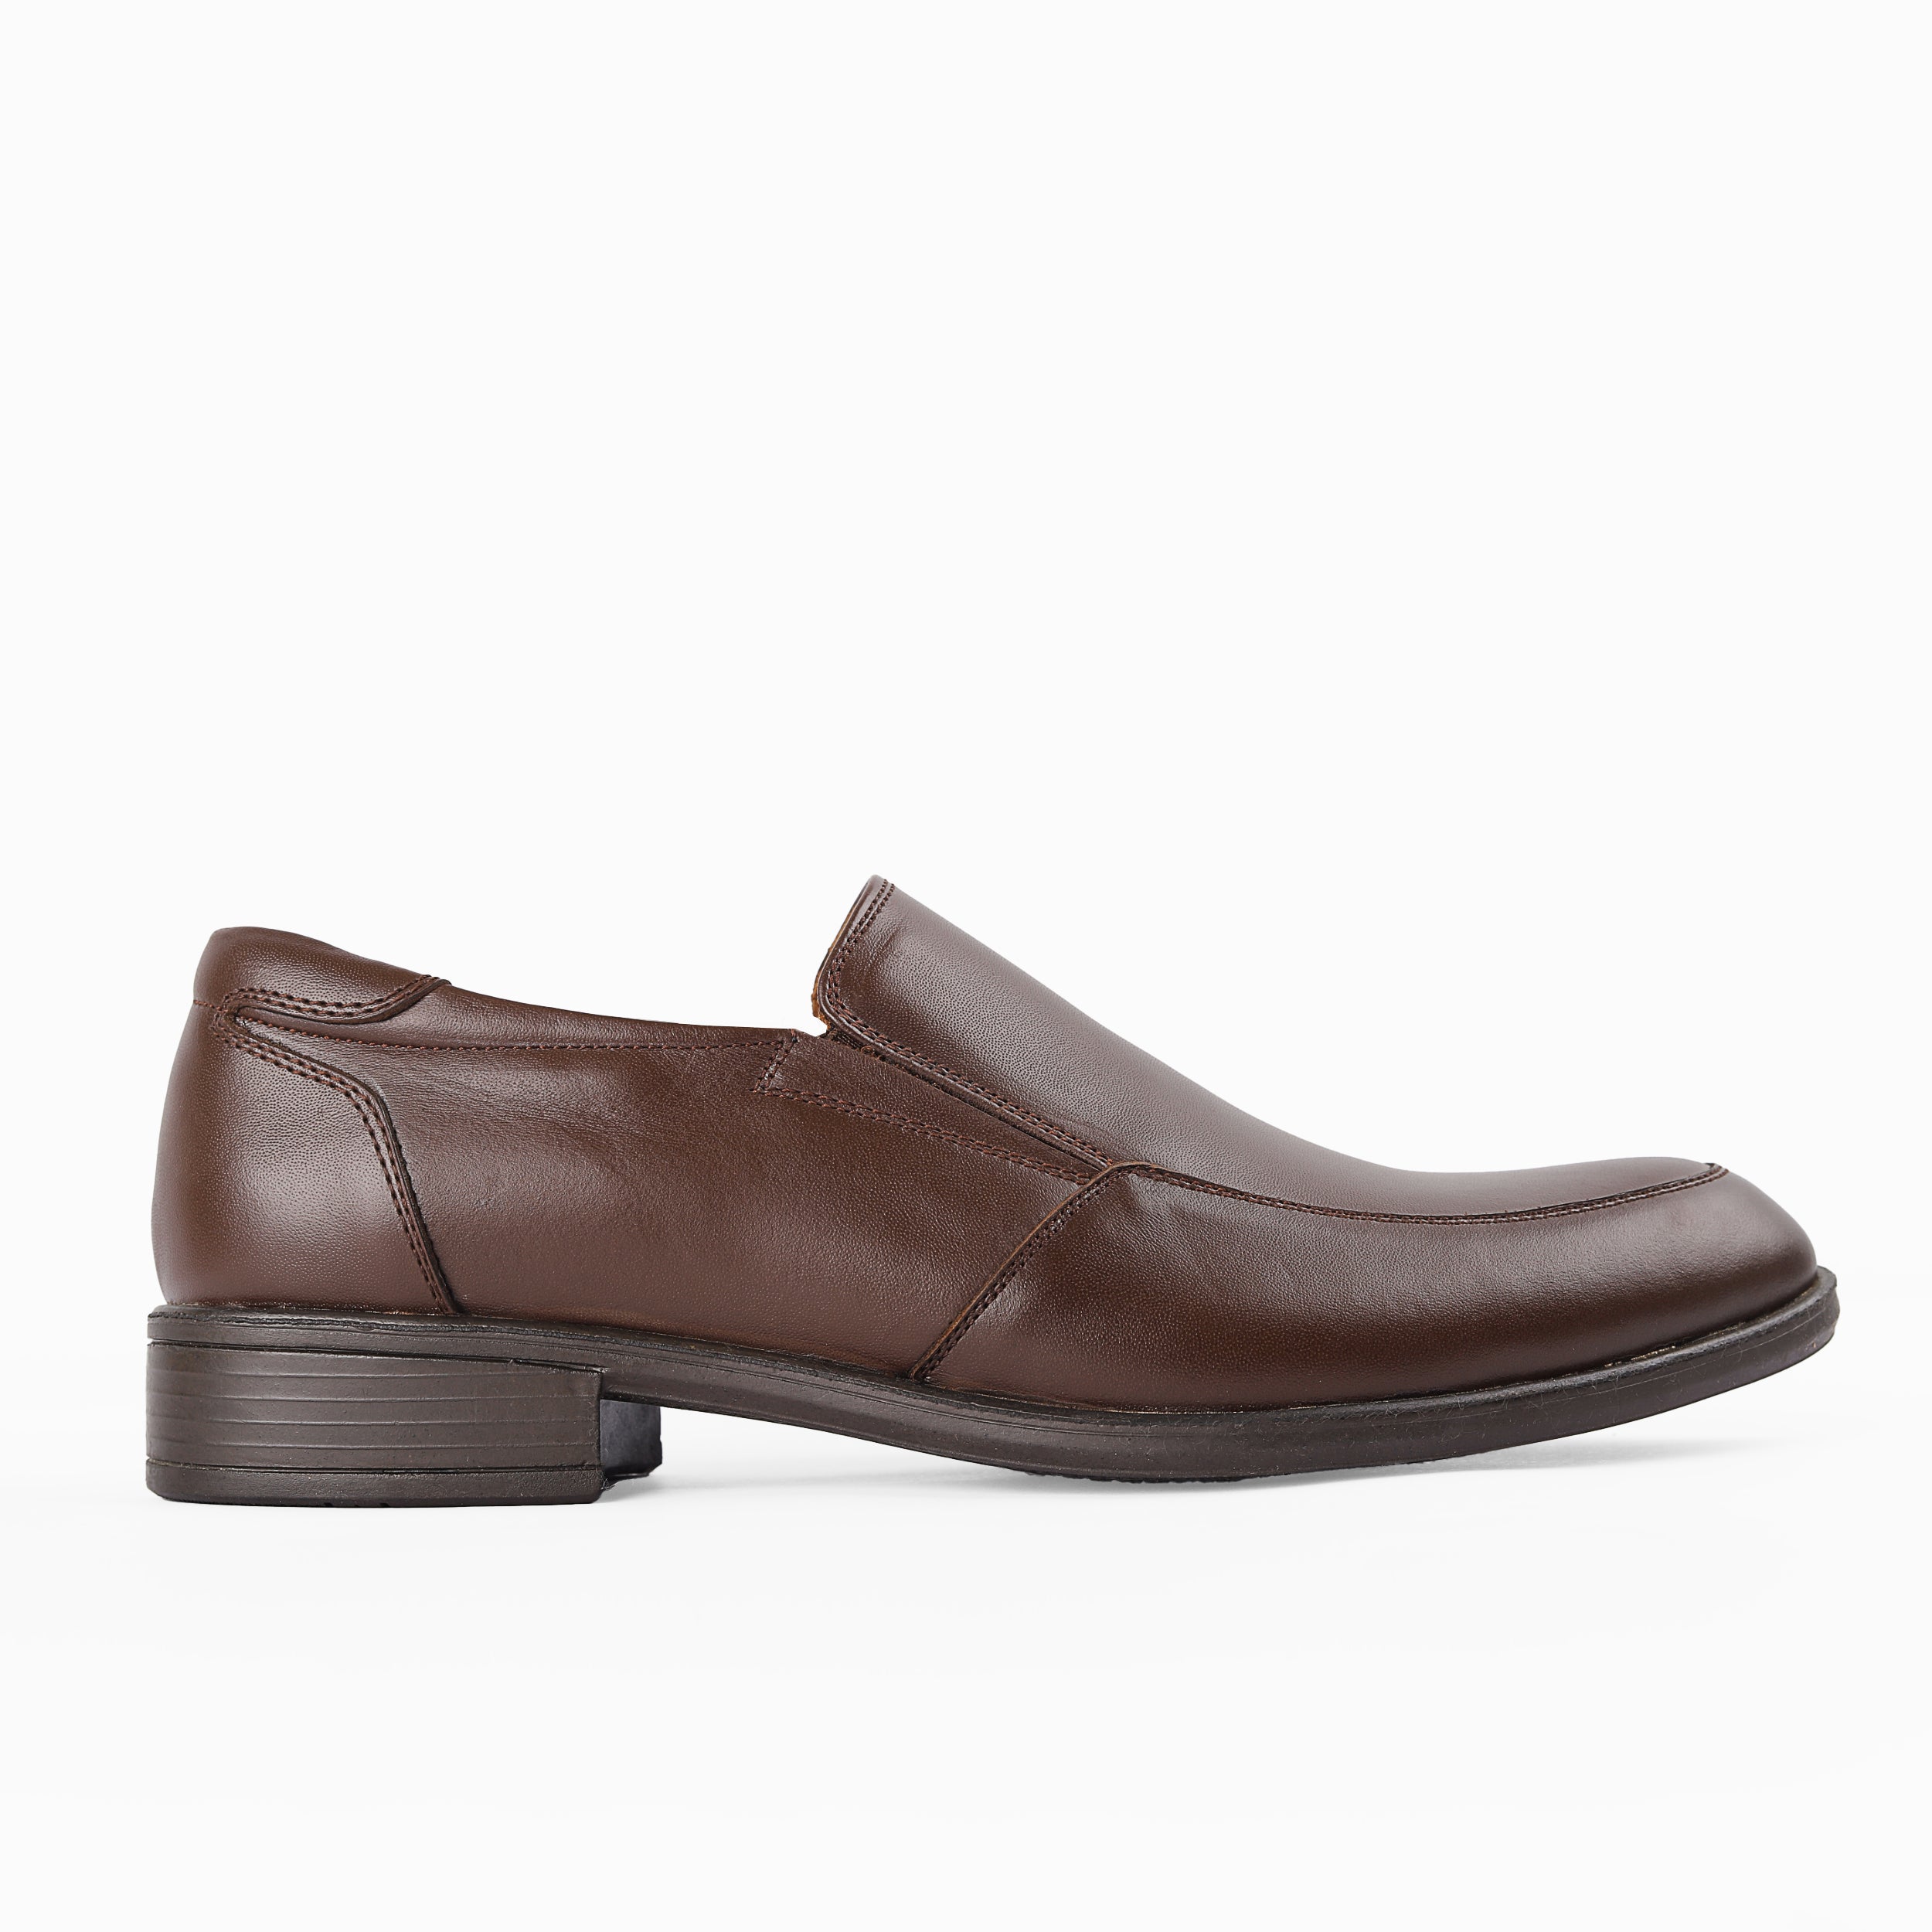 Lotfy Classic Shoes For Men 6755013